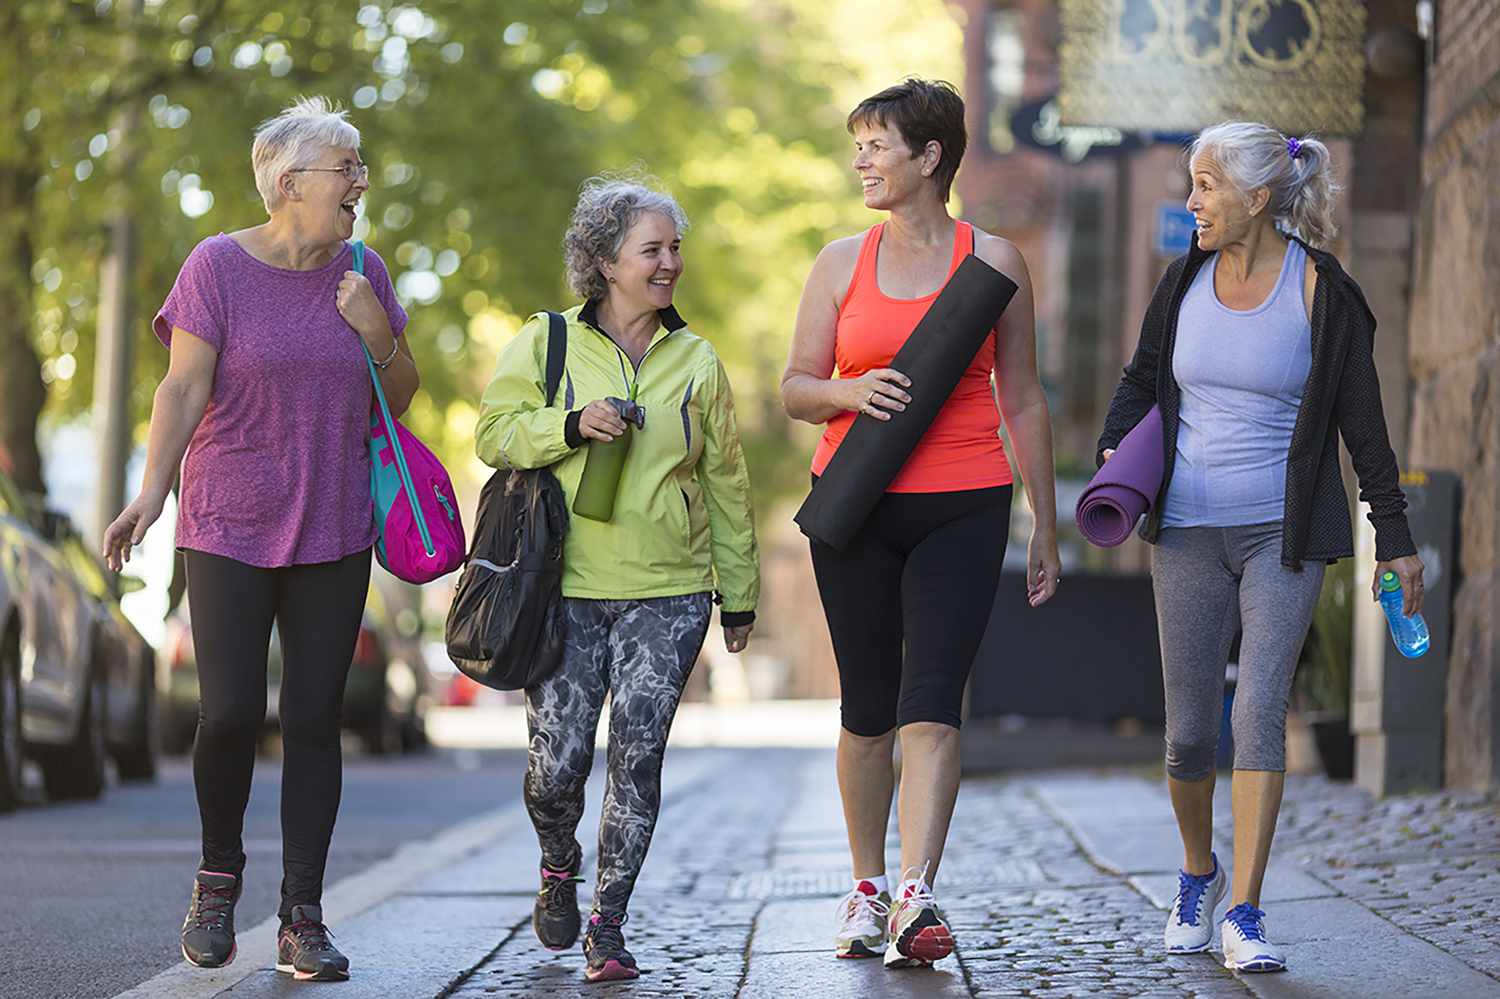 Group of middle age women walking together in fitness clothing